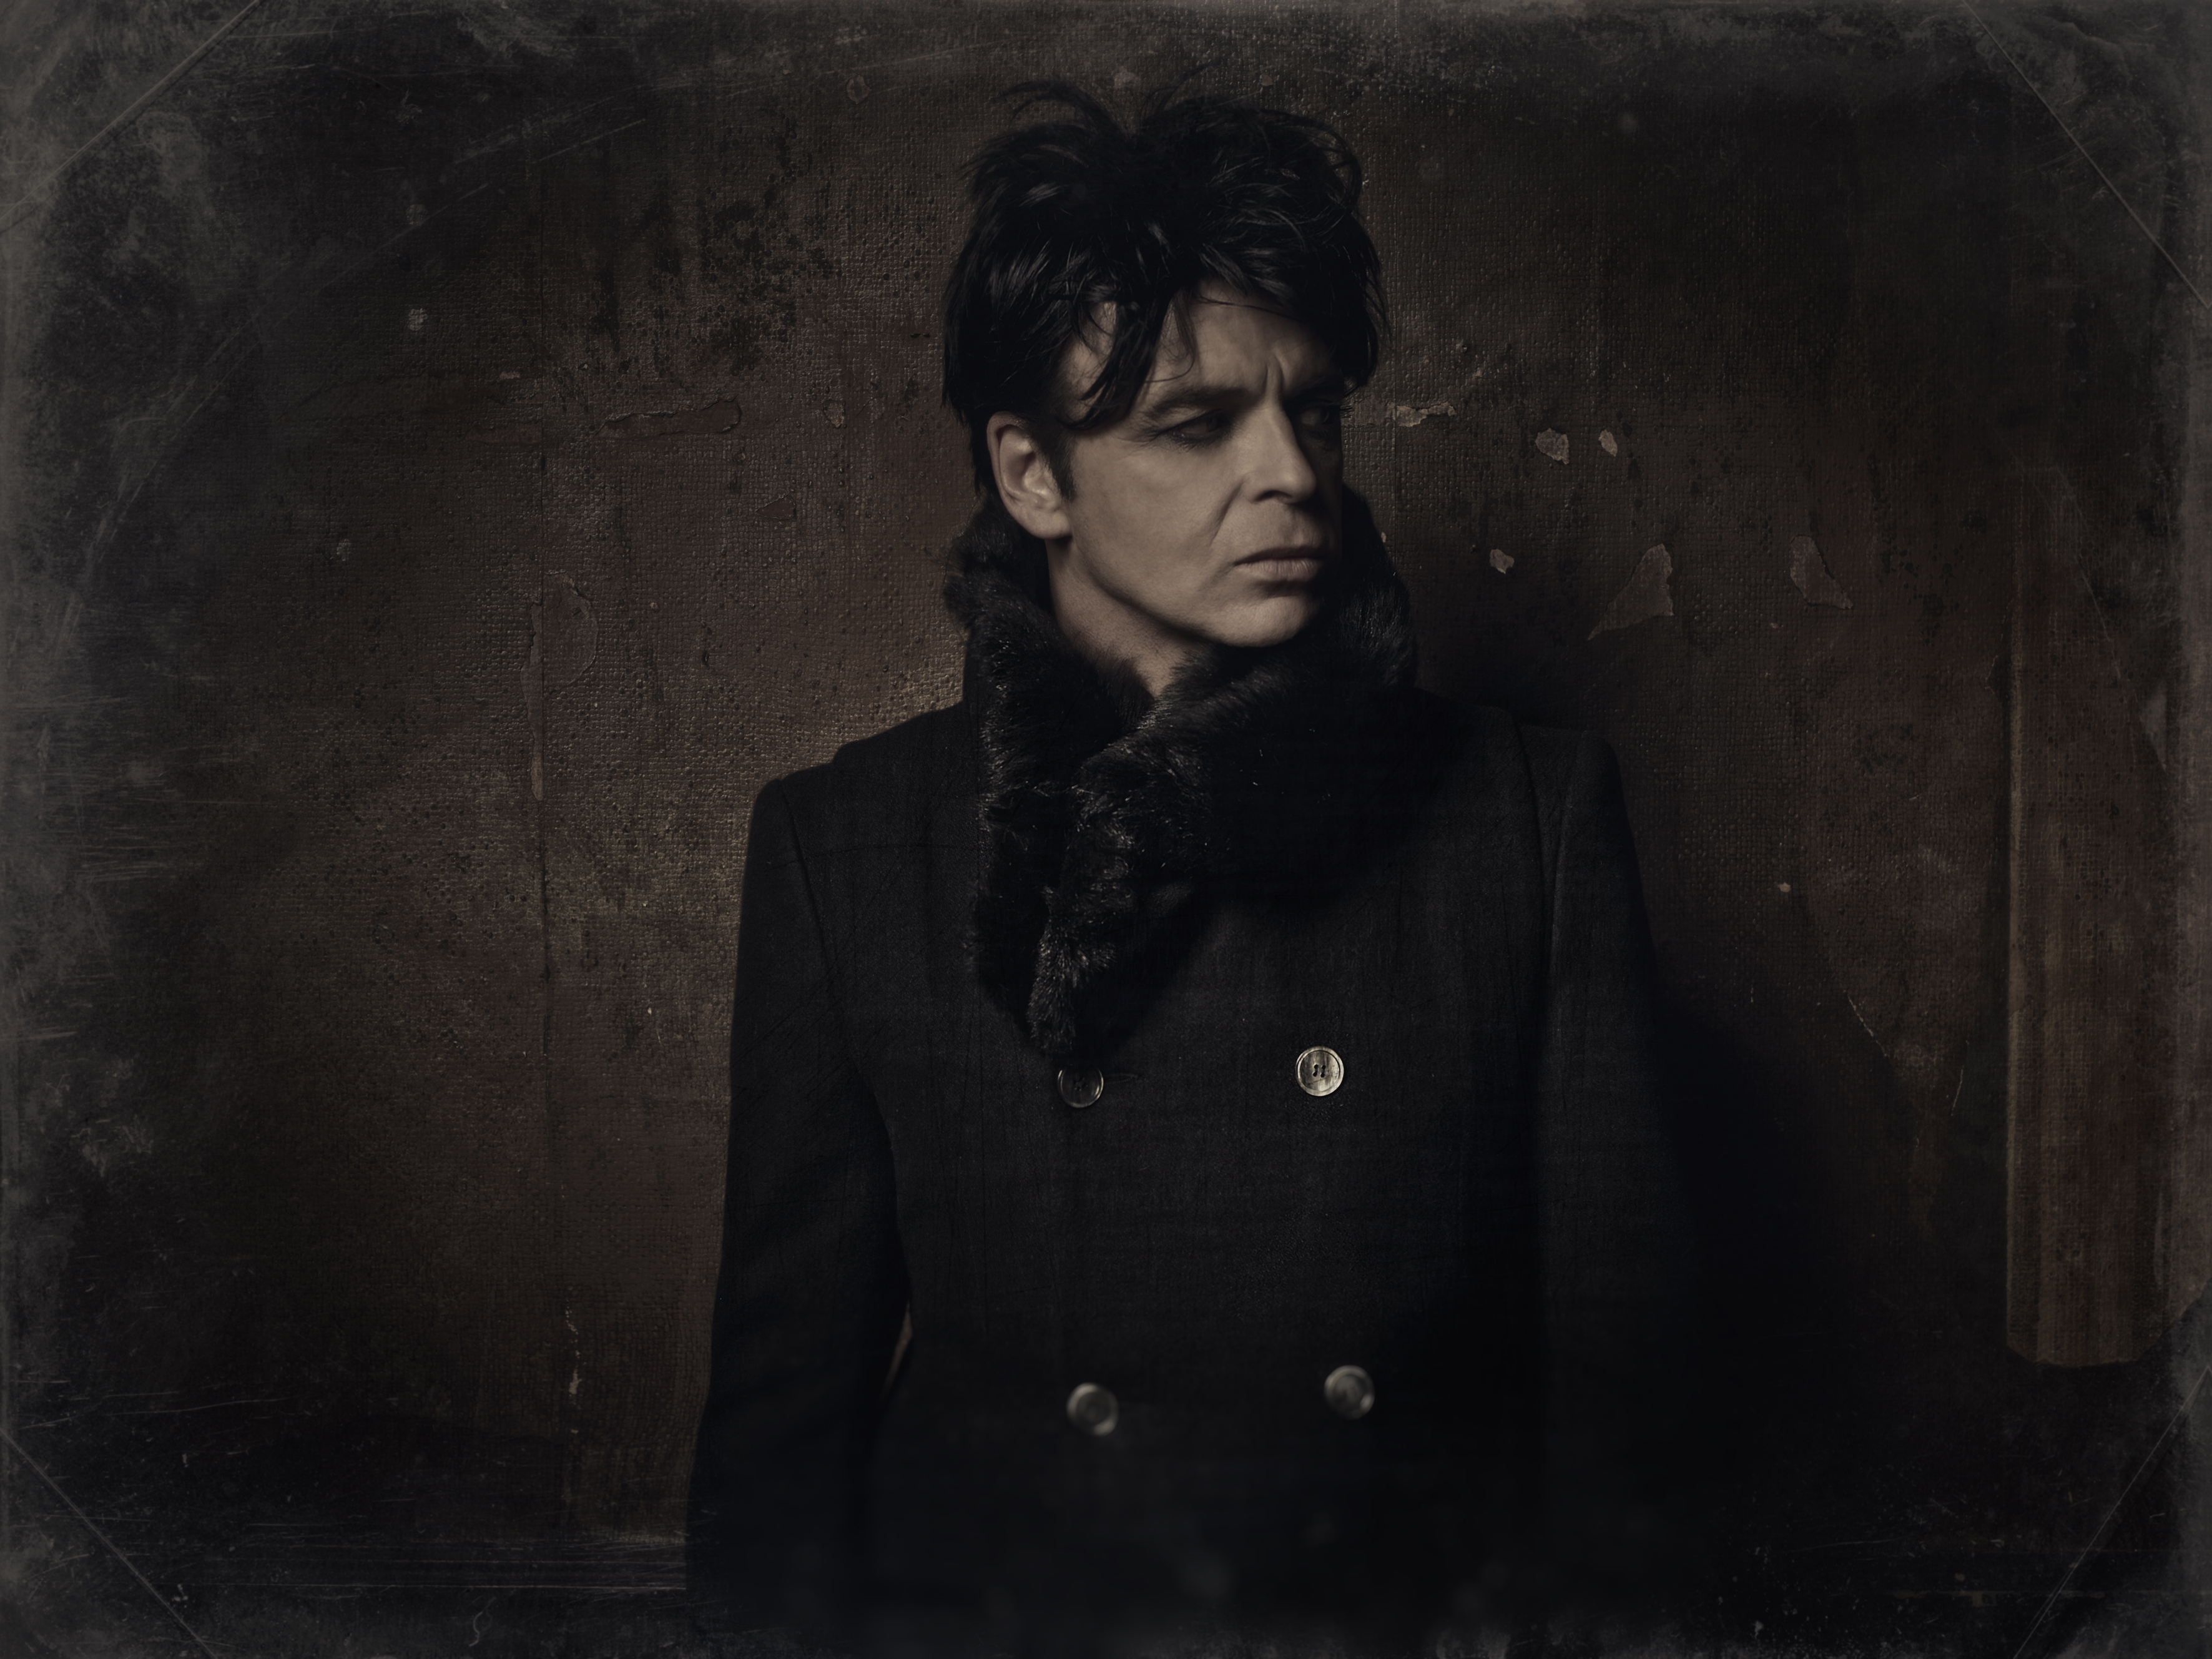 Gary Numan streams new single "And It All Began With You"